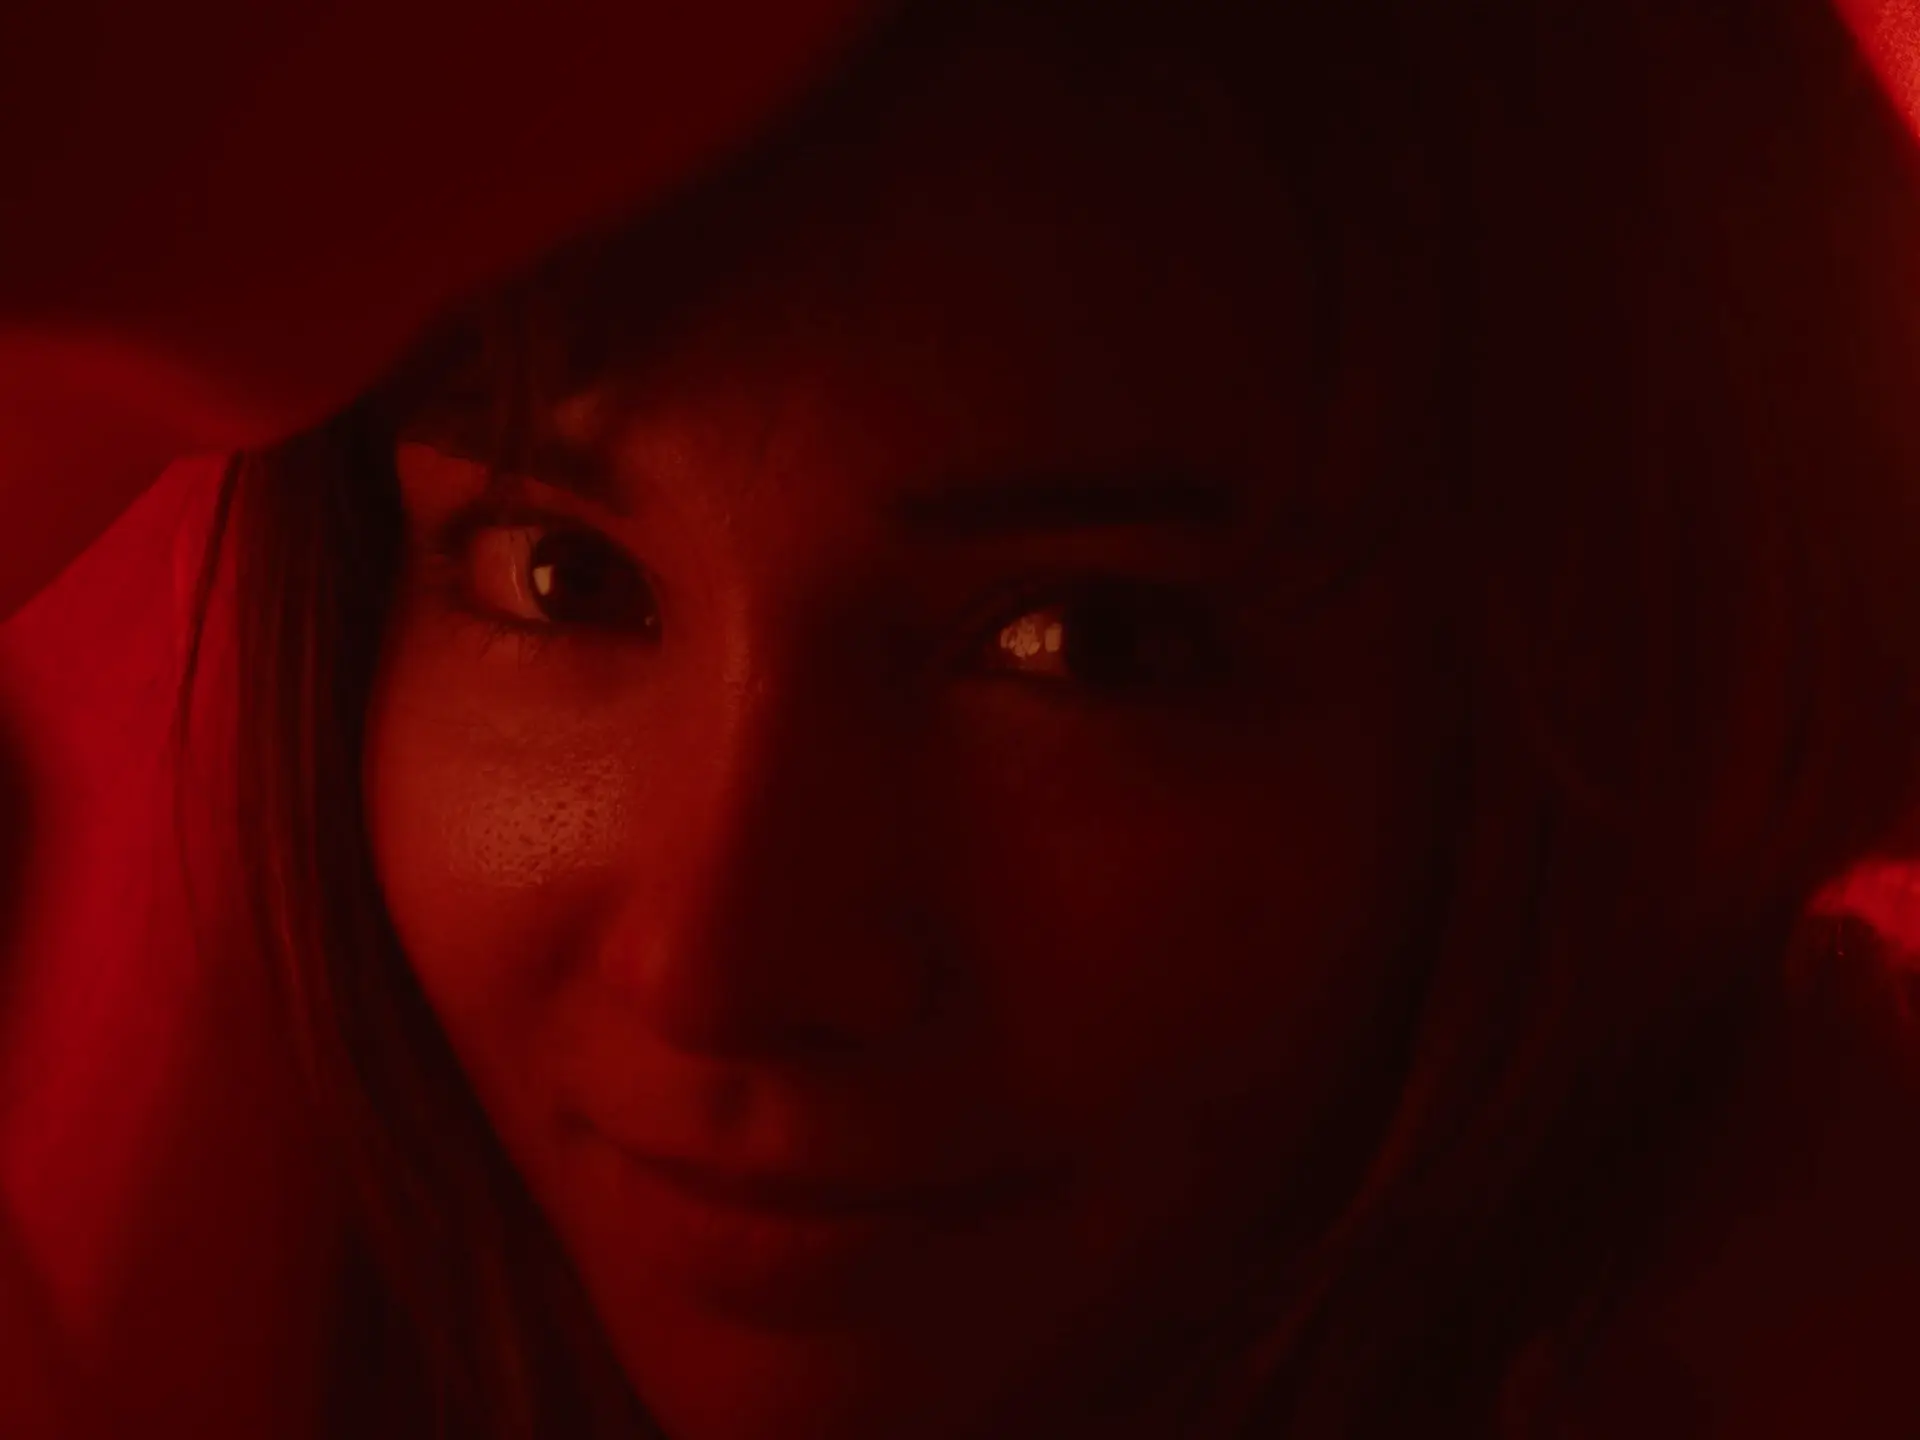 Neon red soaked screenshot from the film 'Malibu' directed by John C Stallings with cinematography by Chaimaa Ormazabal, depicting a close-up of an actress staring deeply into the camera with a subtle smile on her face.